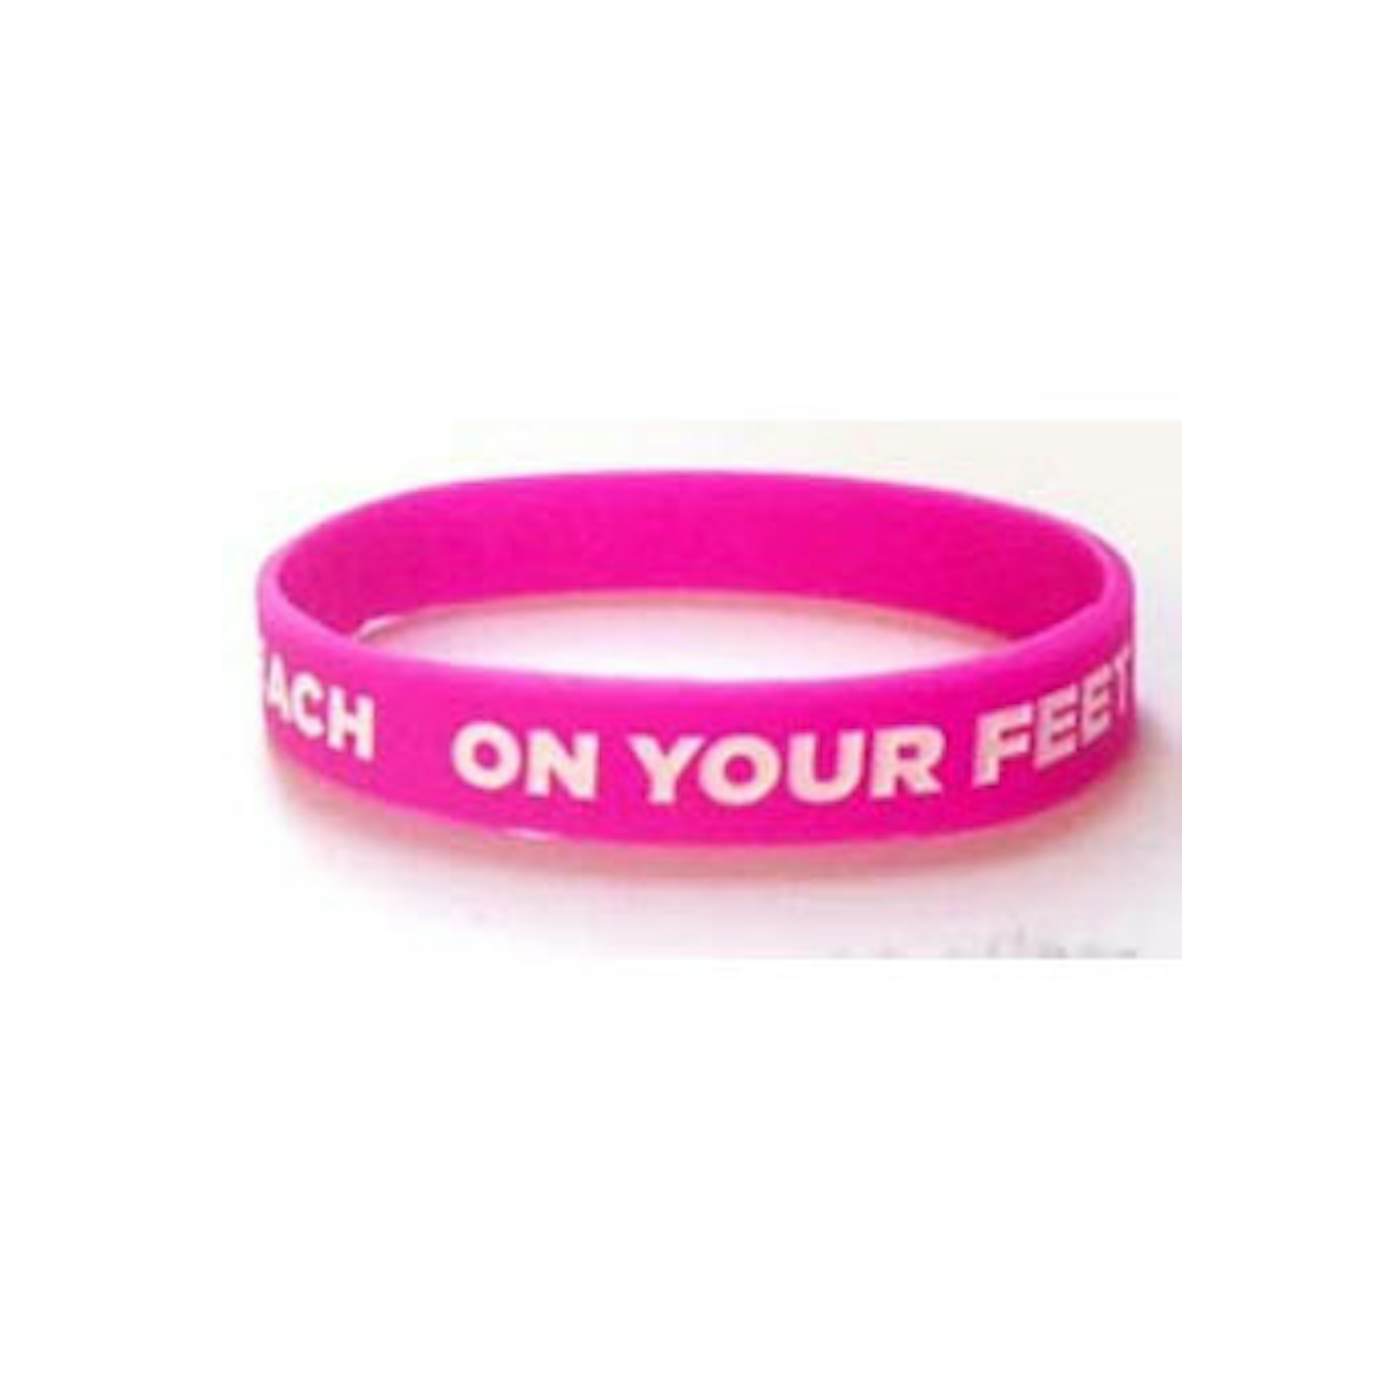 ON YOUR FEET: THE STORY OF EMILIO & GLORIA On Your Feet Pink Bracelet